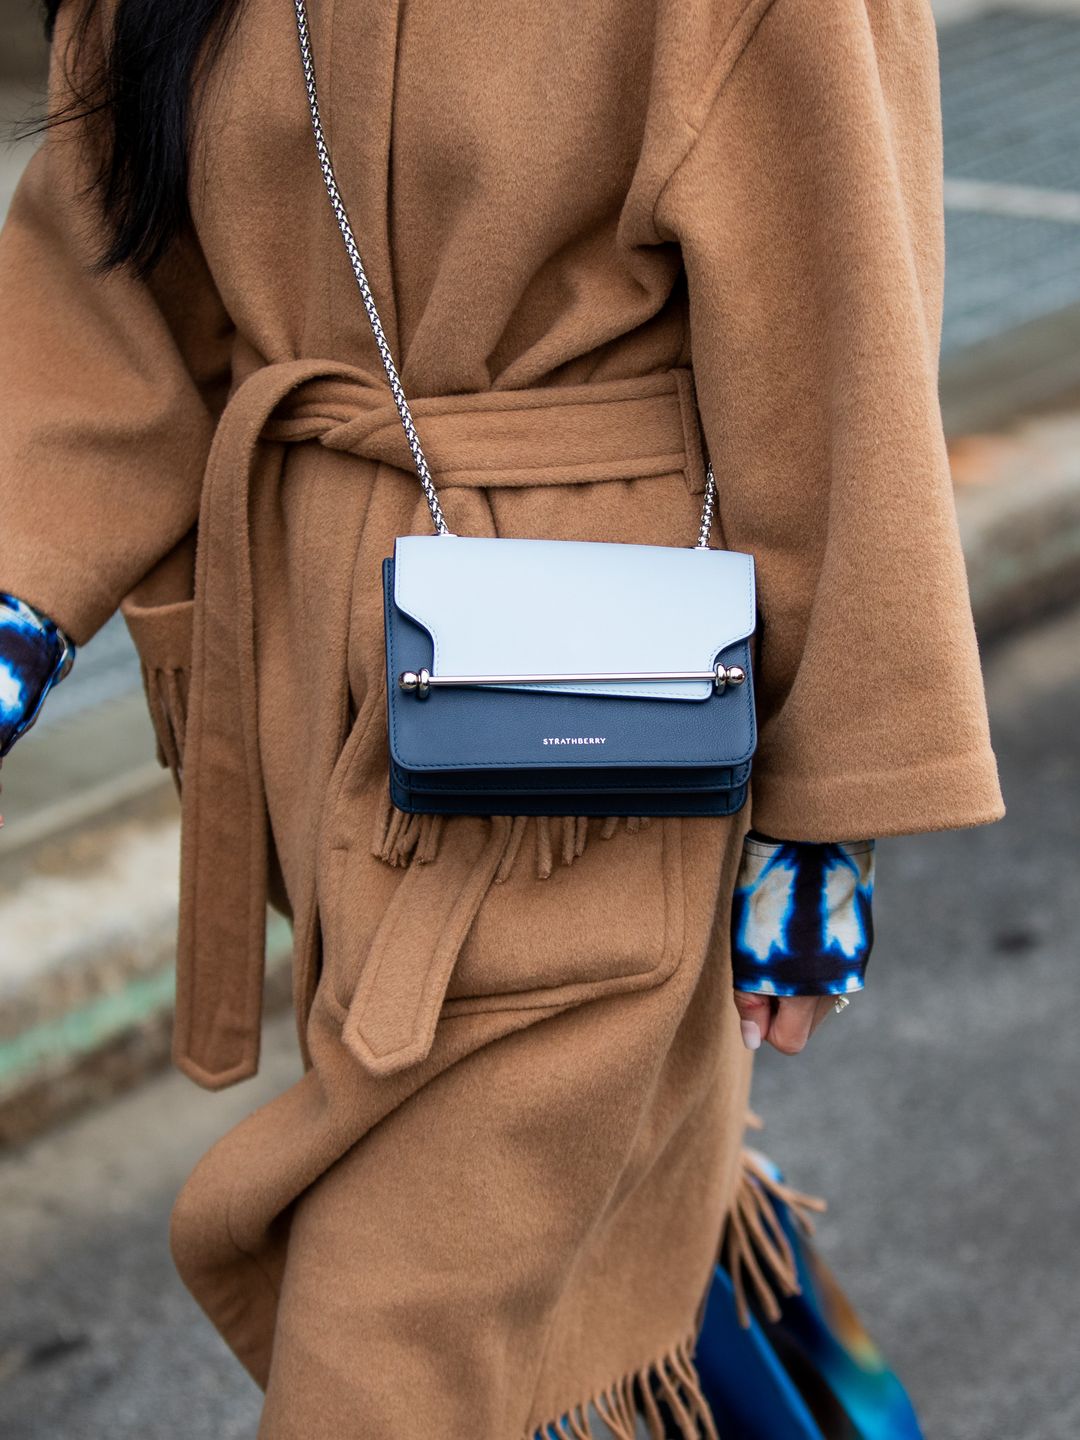 Strathberry two tone blue bag spotted during New York Fashion Week 